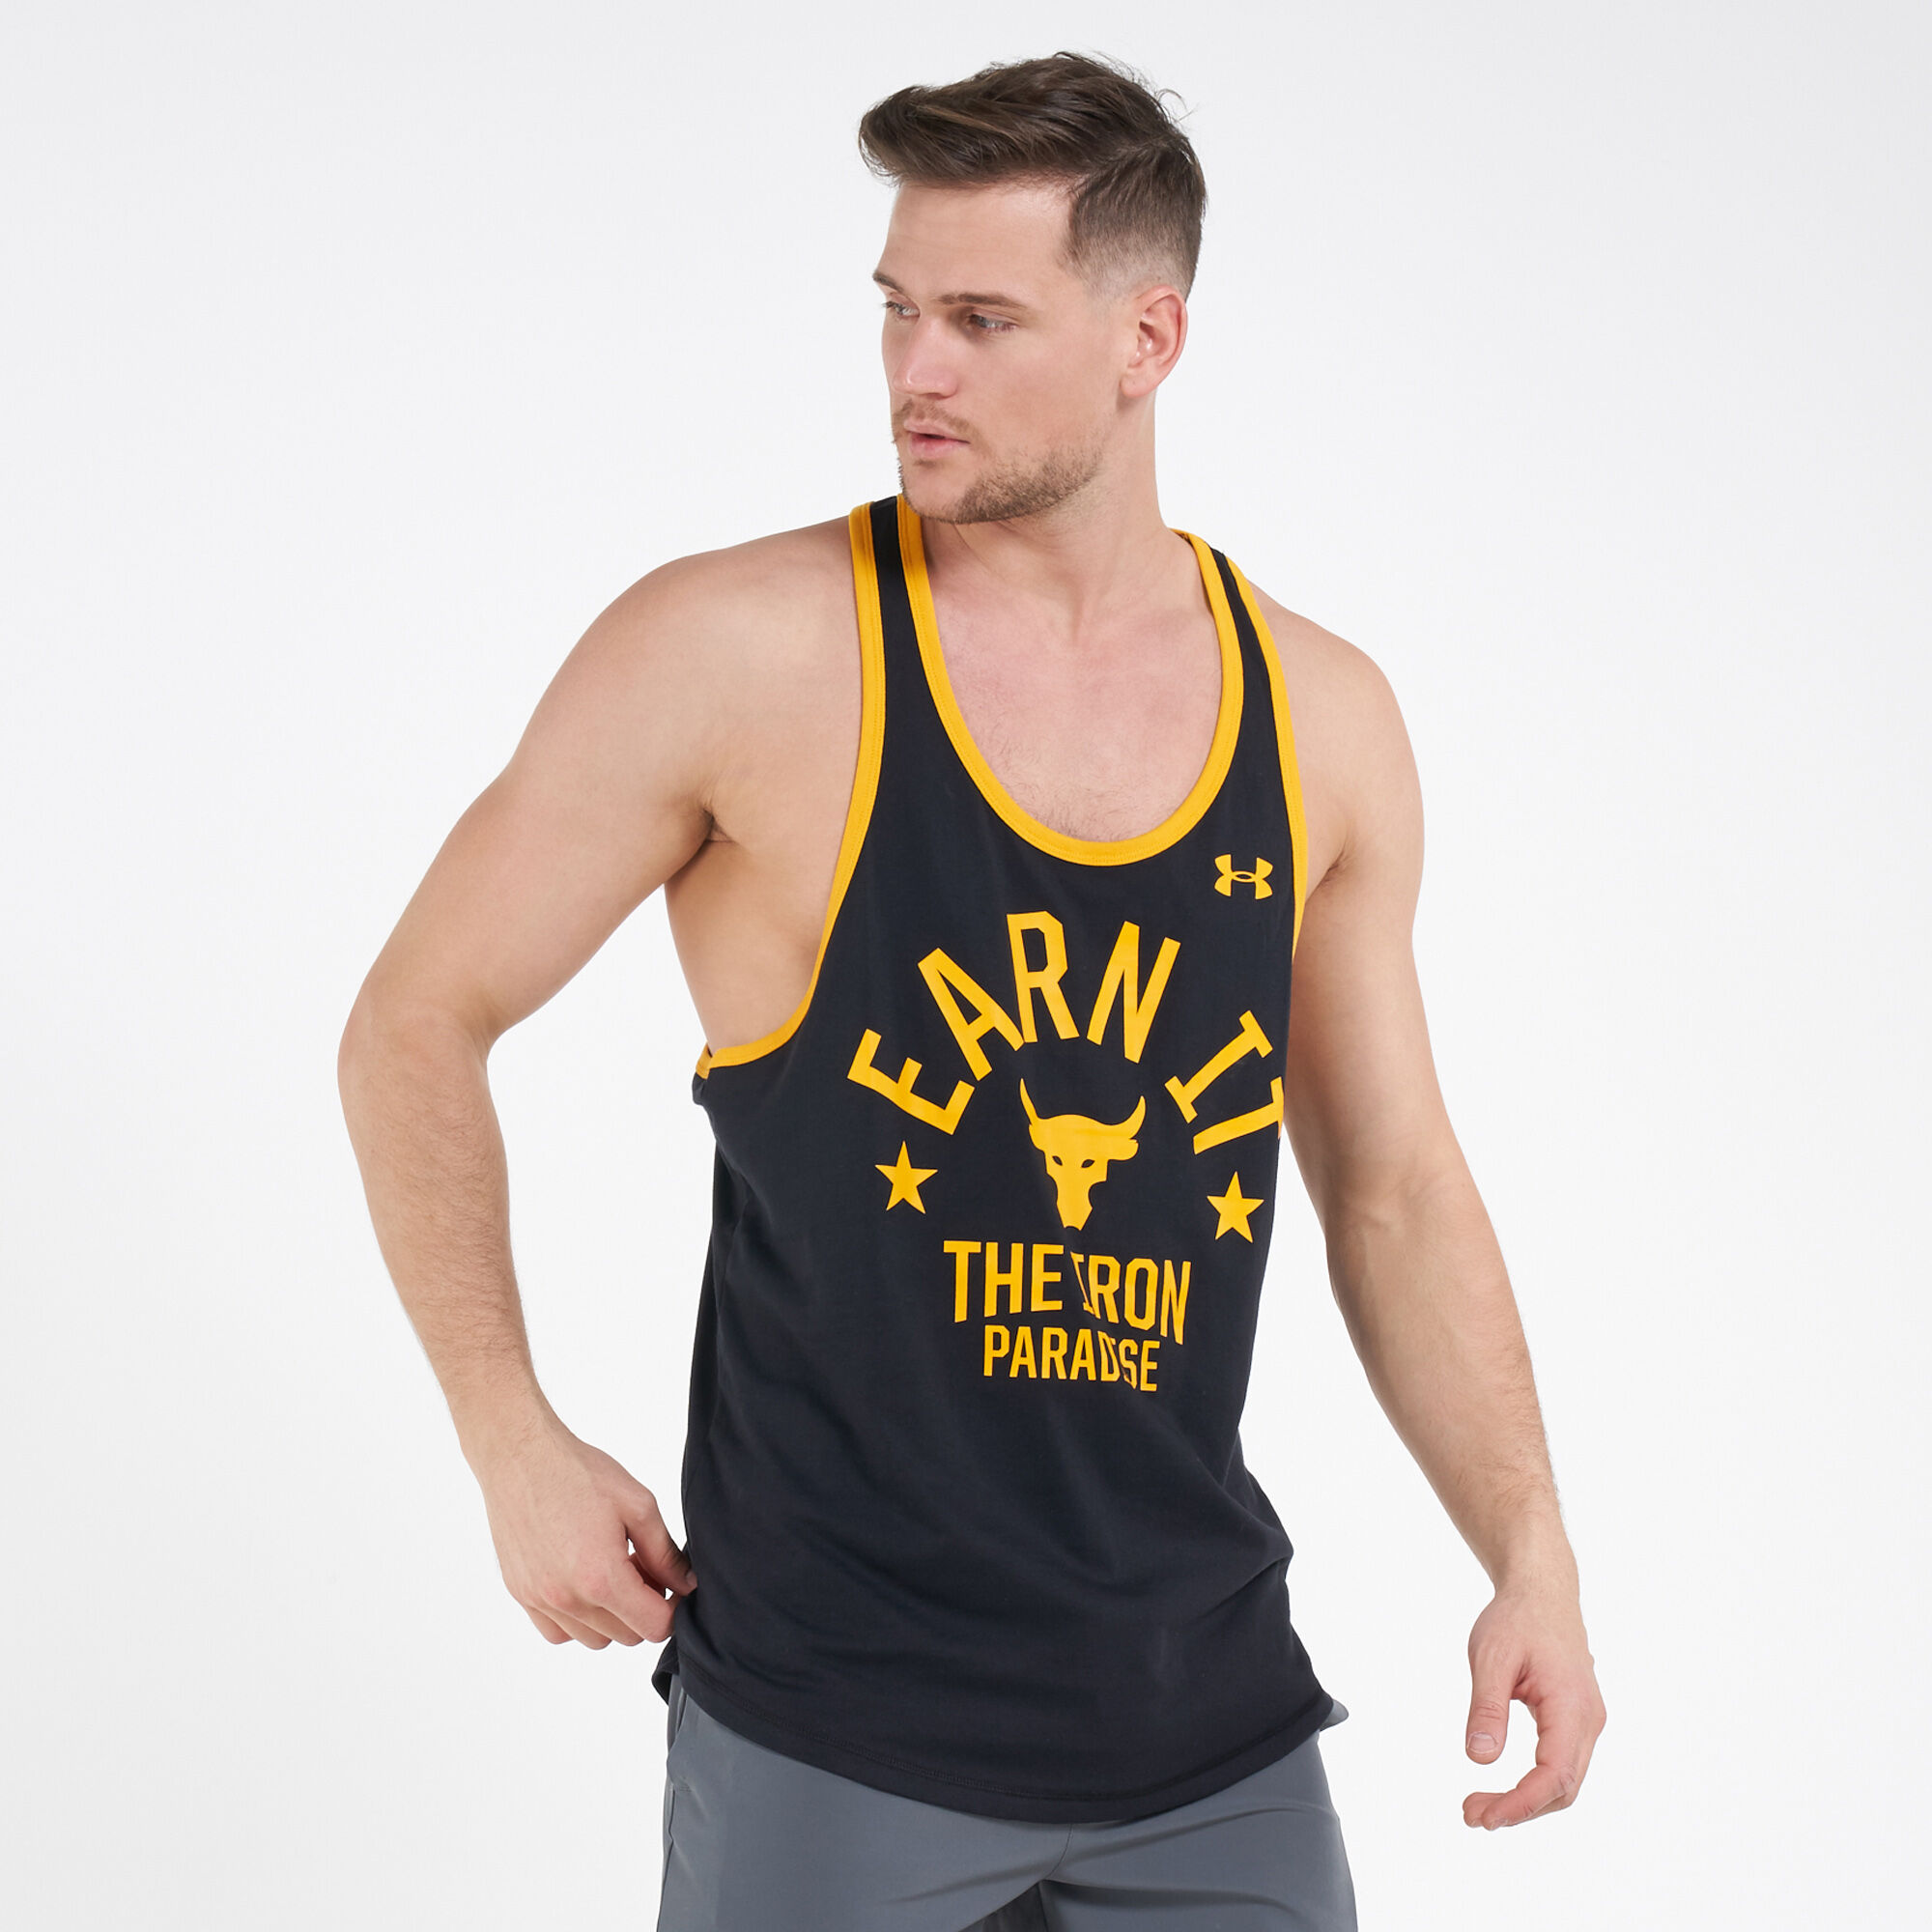 Under Armour Men's Project Rock Iron Paradise Tank, Outlaw Mana